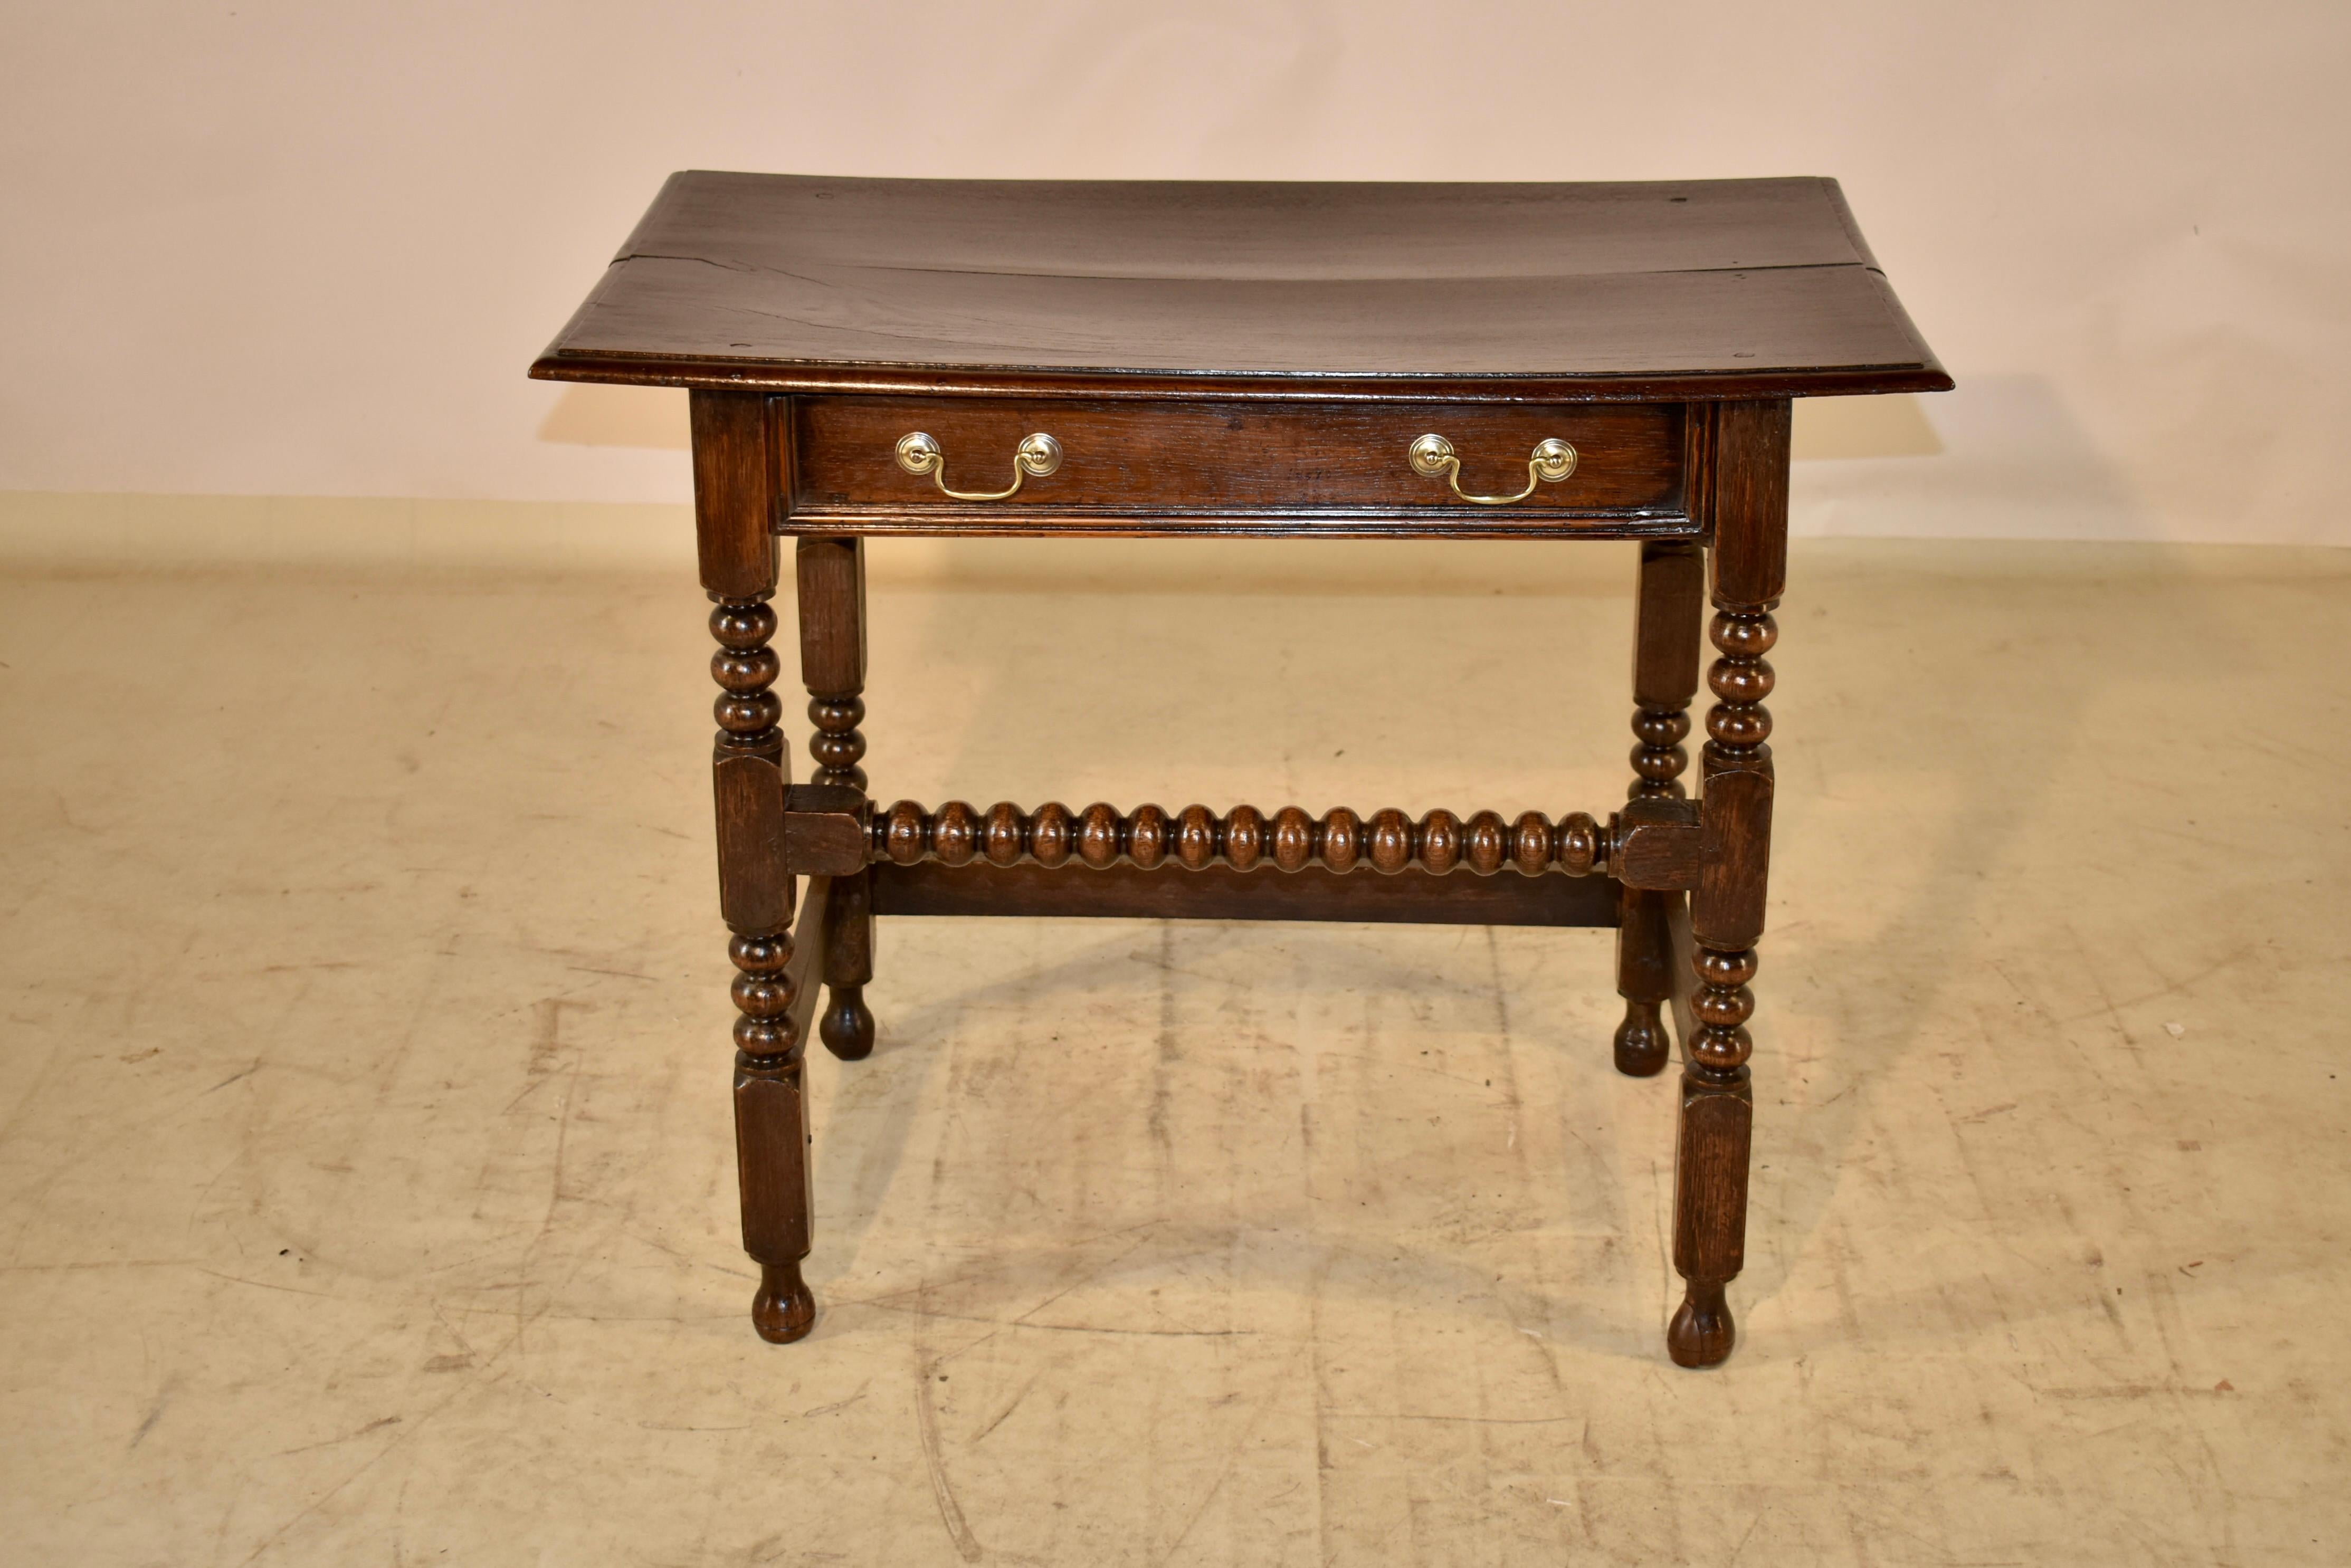 18th century Oak side table from England with a two plank top, which has a beveled edge, following down to simple sides and a single drawer in the front. The drawer has a molded edge. The table is supported on hand turned legs with bobbin and block